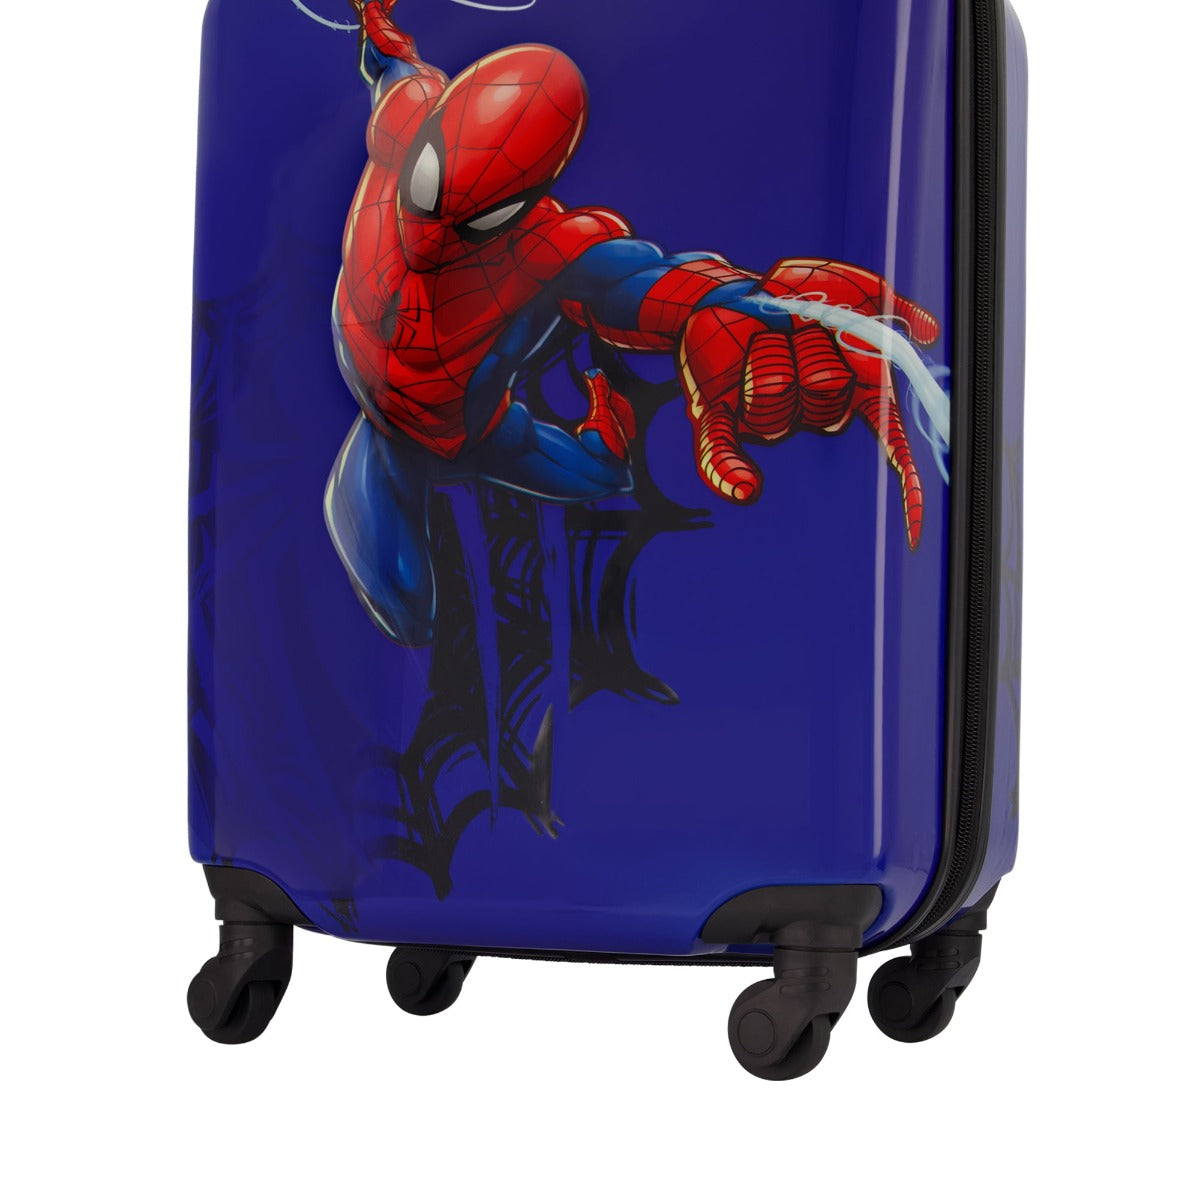 Blue Ful Marvel Spiderman web 21 inch spinner suitcase rolling luggage for kids